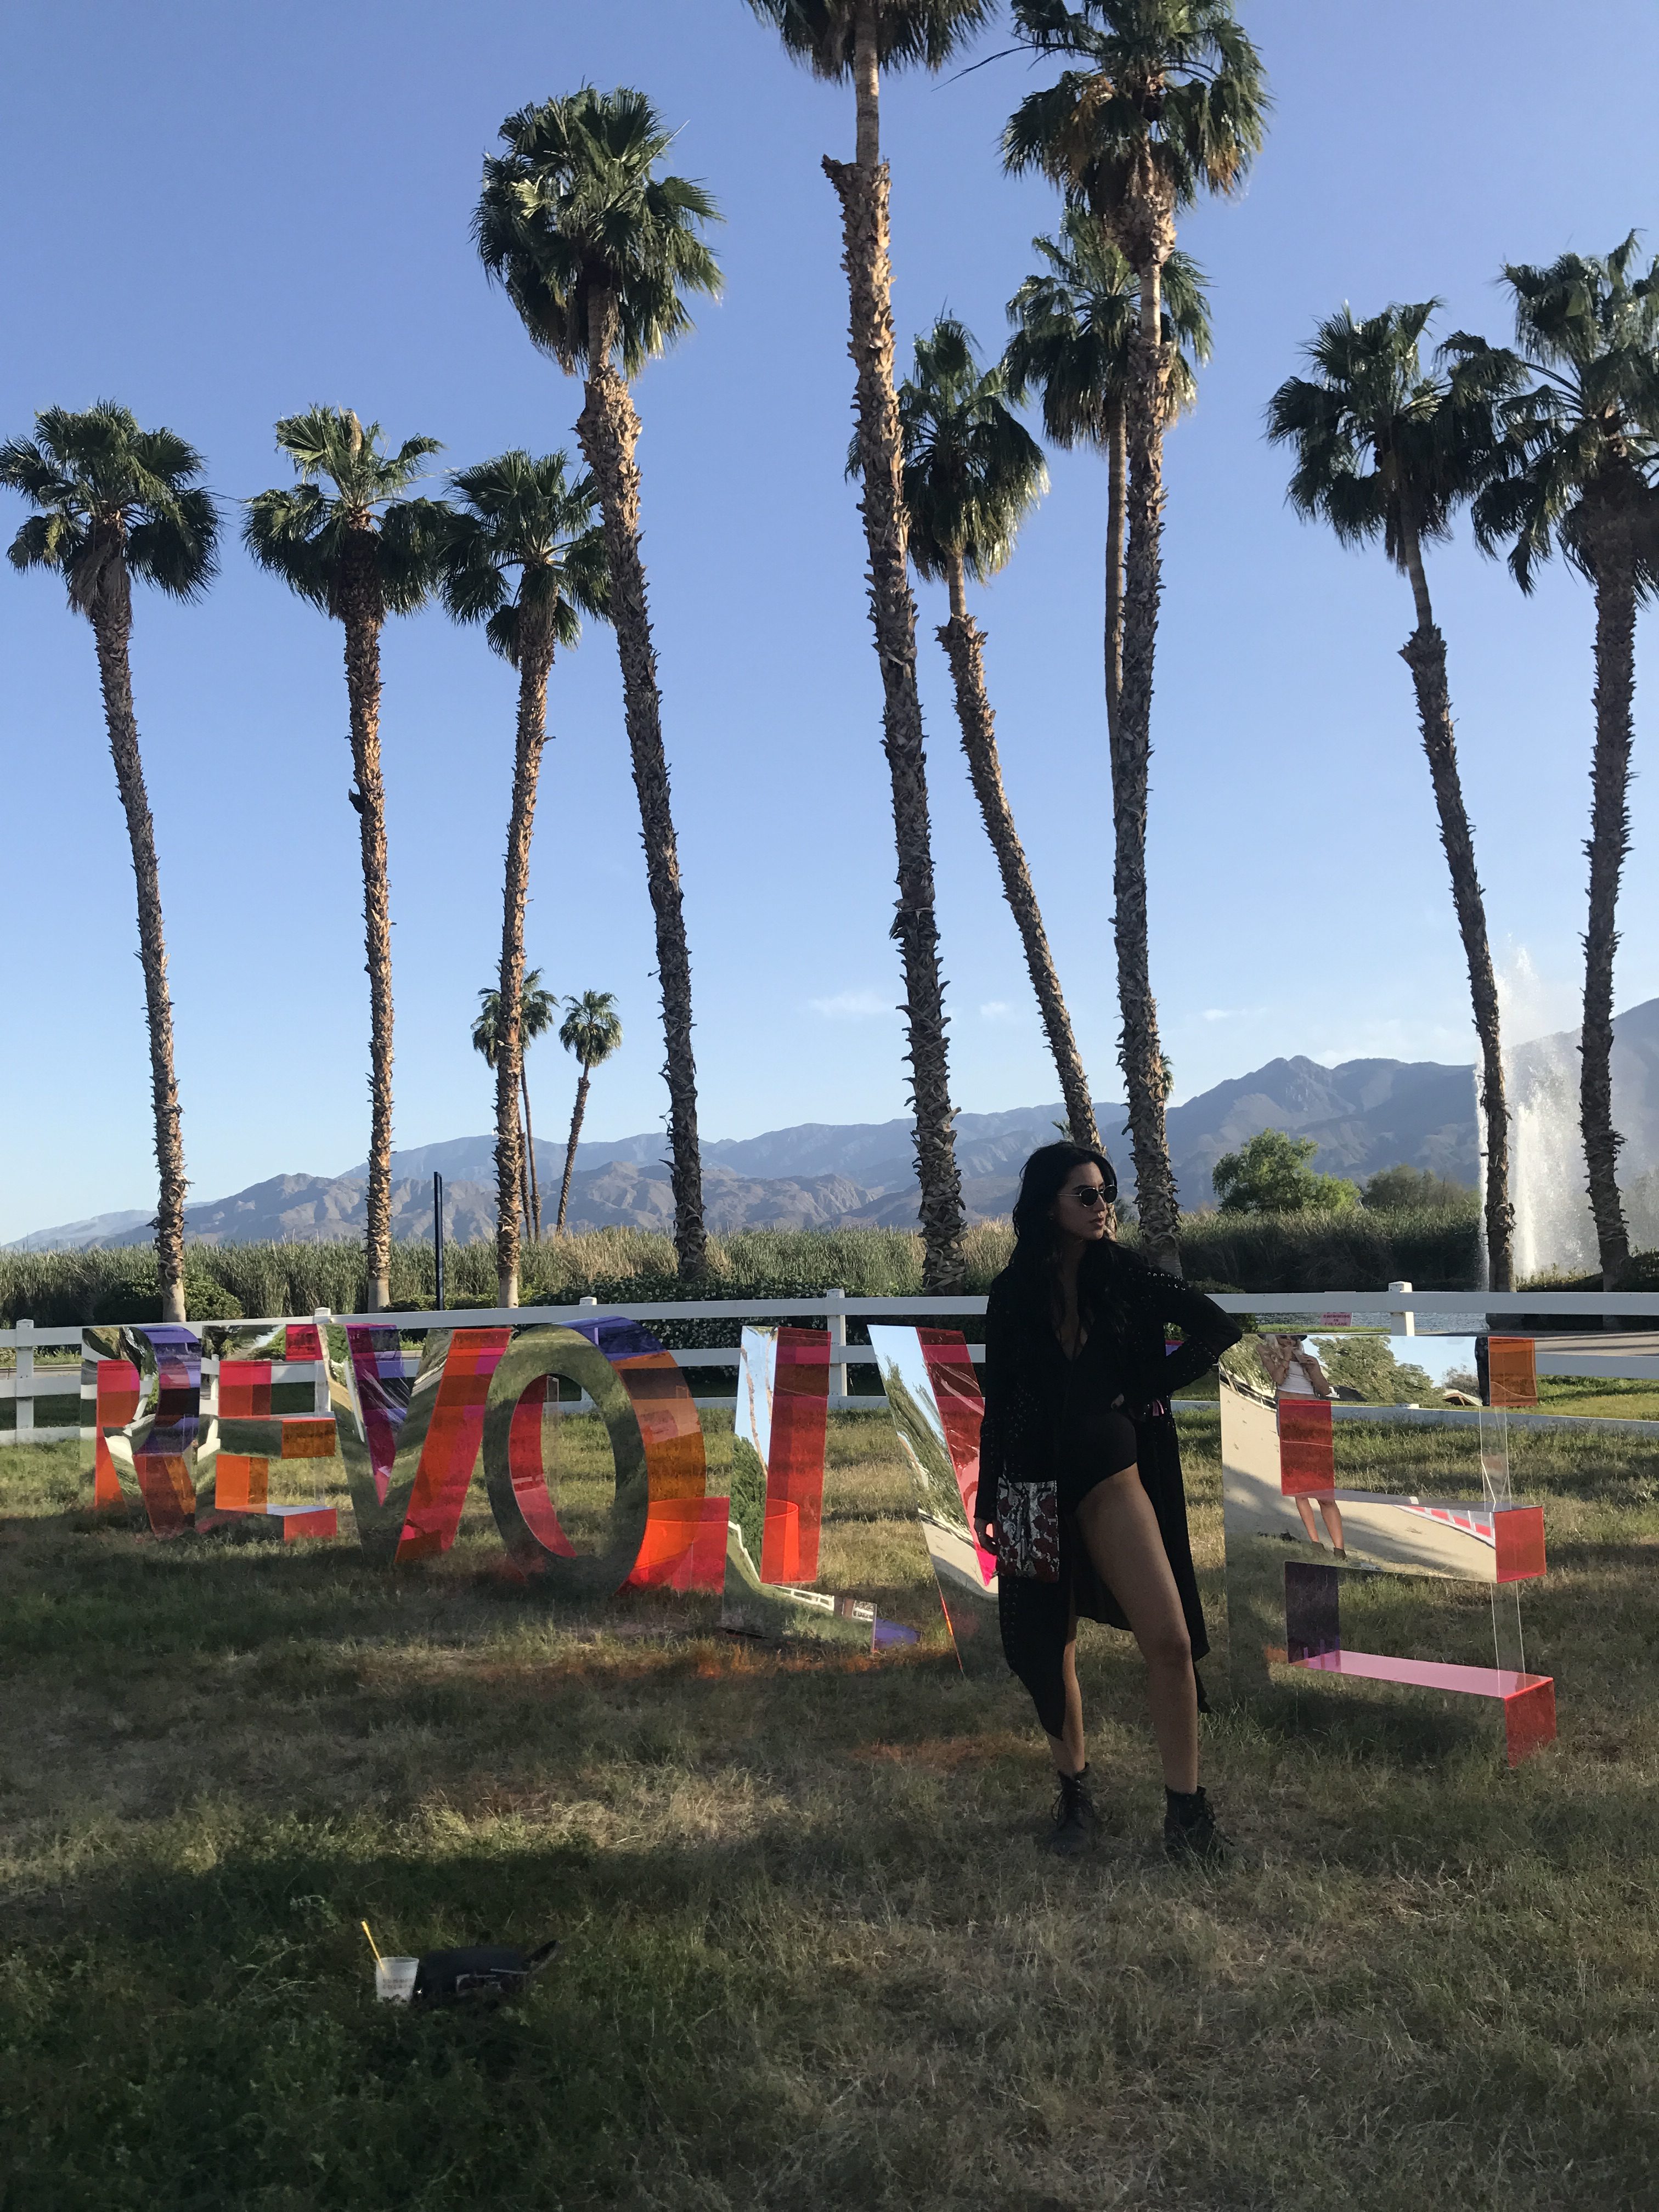 LA Blogger Tania Sarin on coachella weekend featuring festival style with elisabeth weinstock at revolve party festival